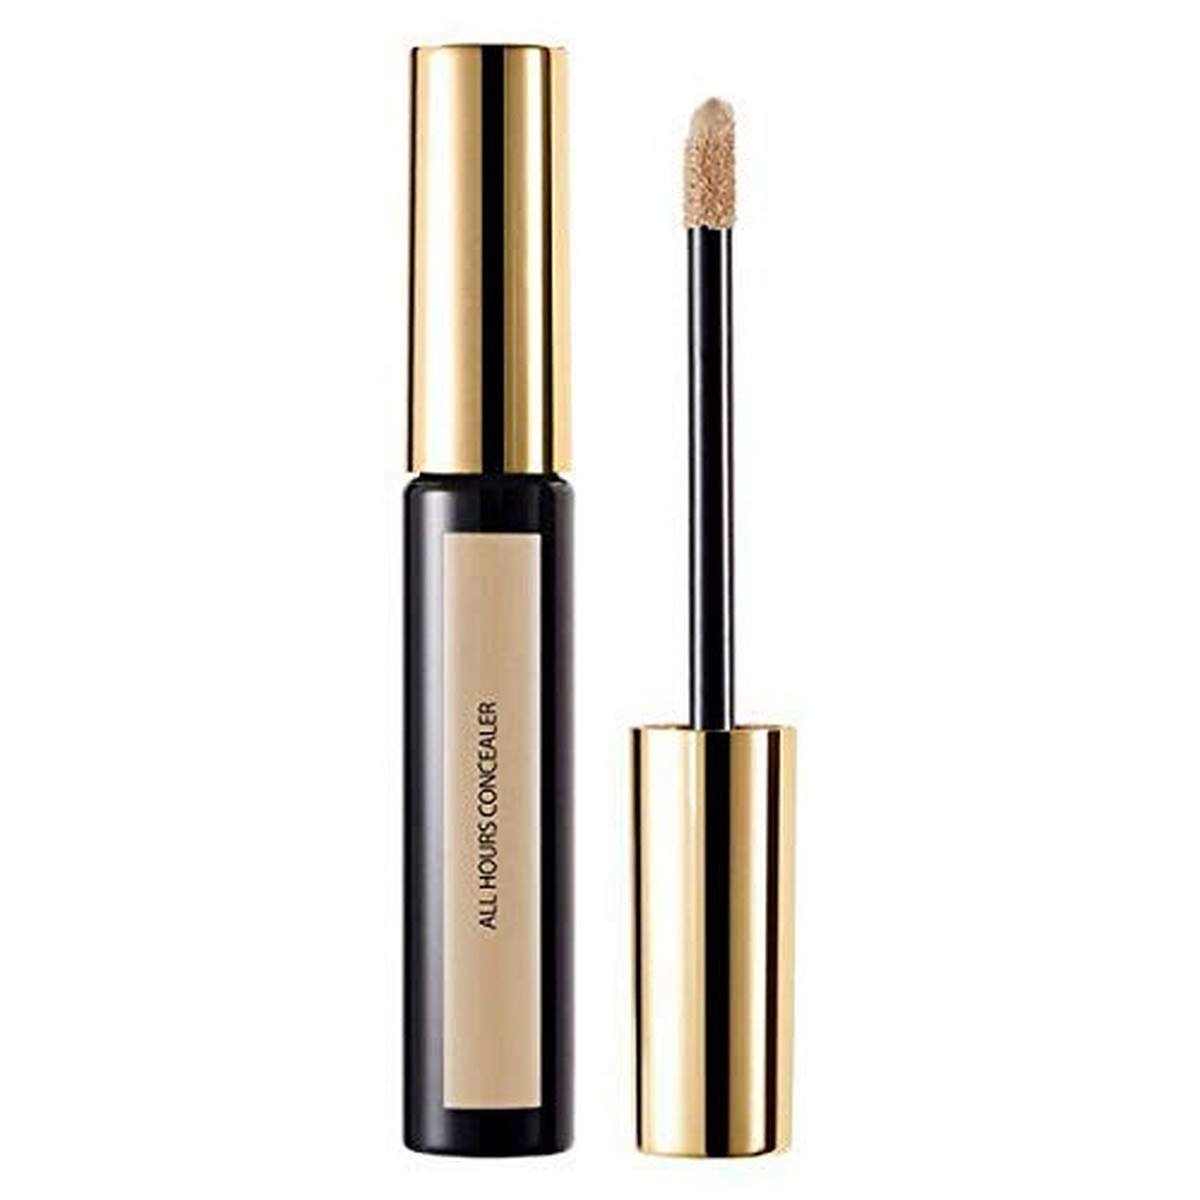 Correttore Yves Saint Laurent All Hours Concealer Tester - Profumo Web